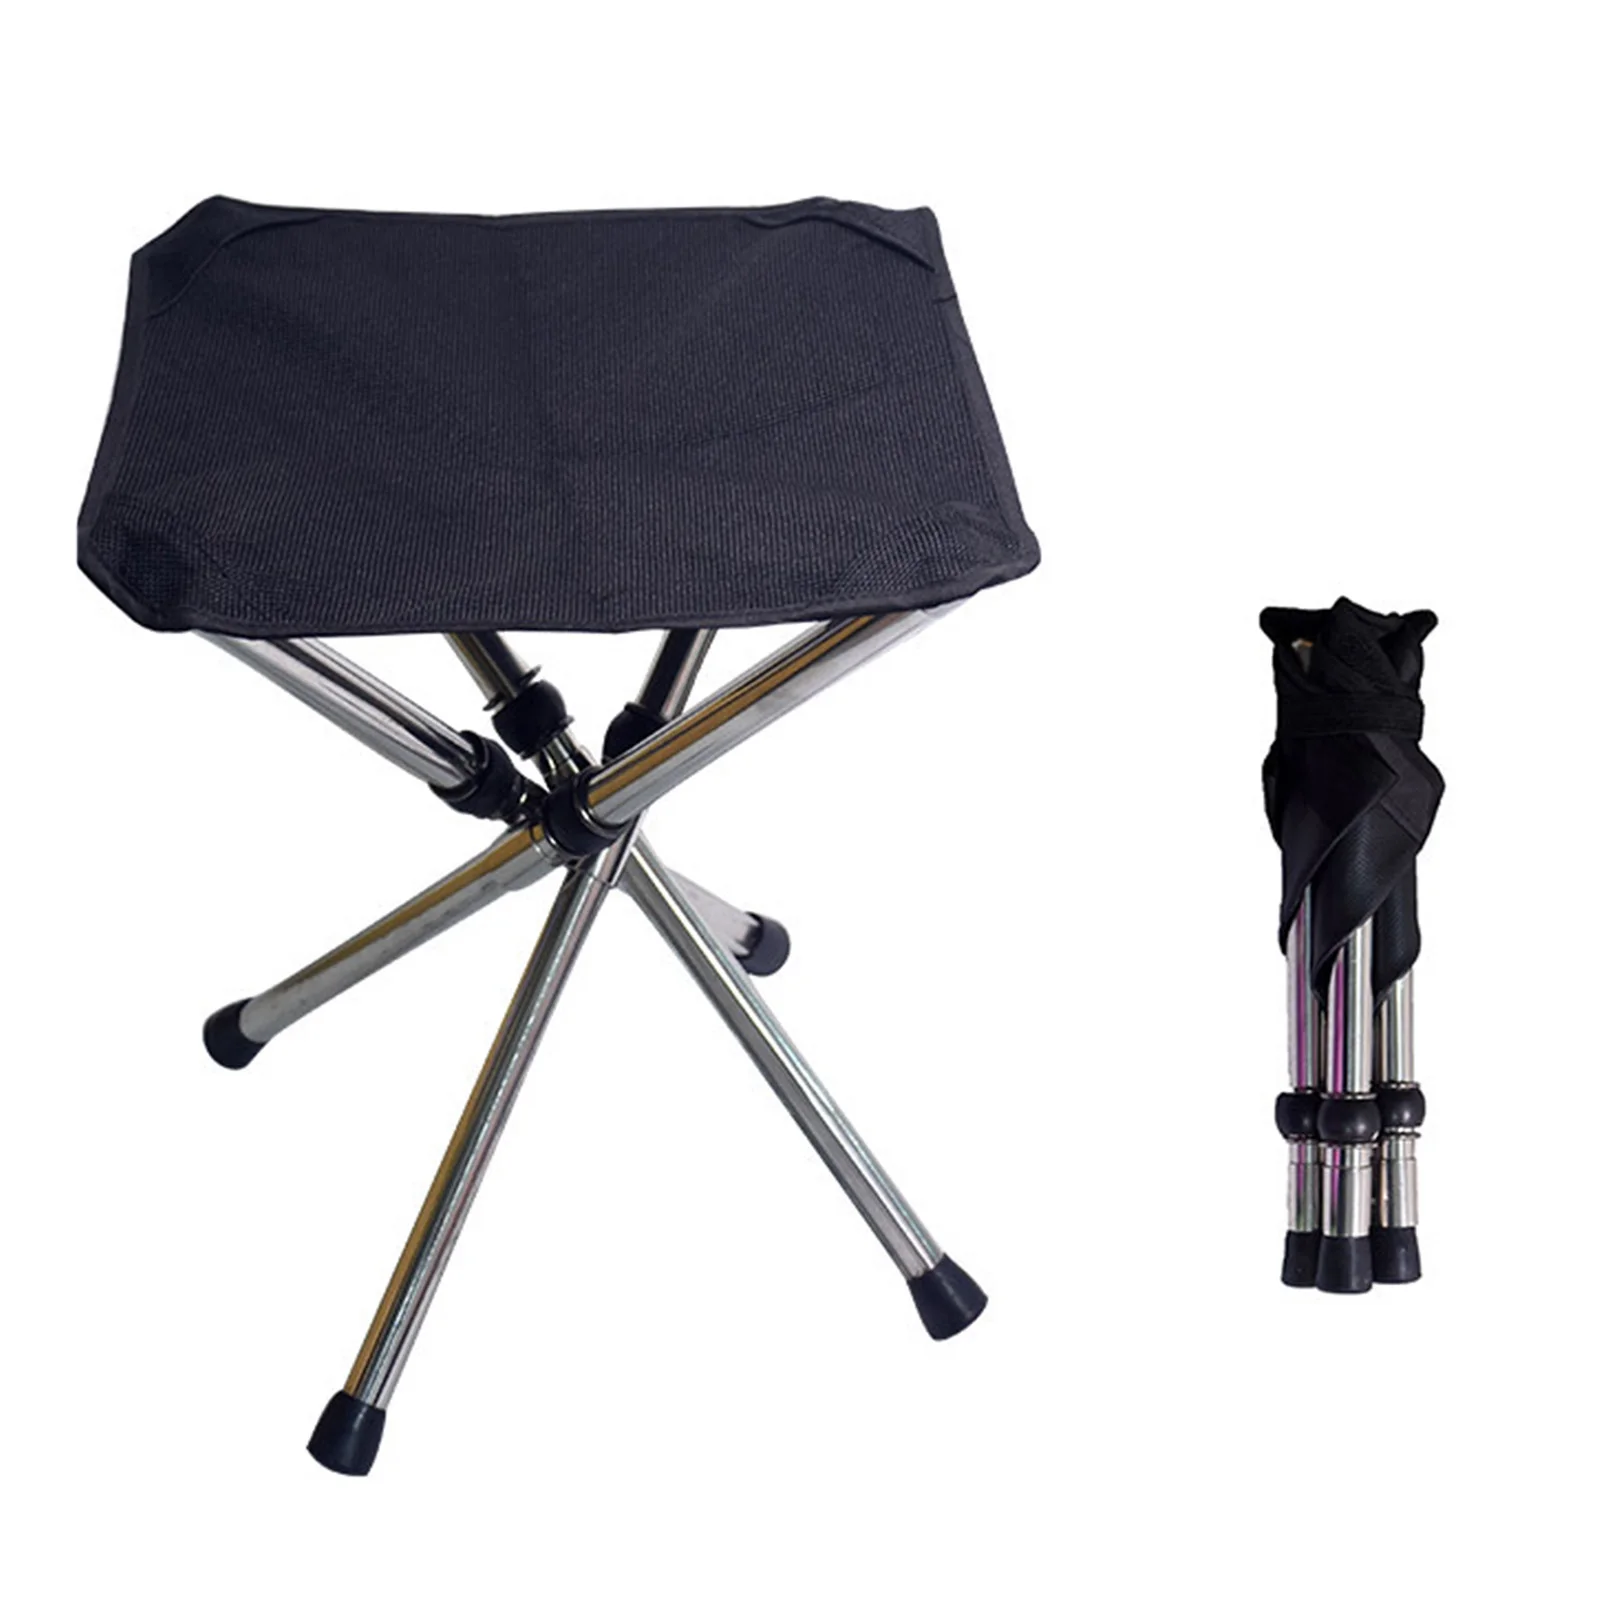 

Telescoping Camping Stool Collapsible Camp Stool For Adults Durable & Thickened 4-Leg Sturdy Portable Camp Stool Backpack Stools